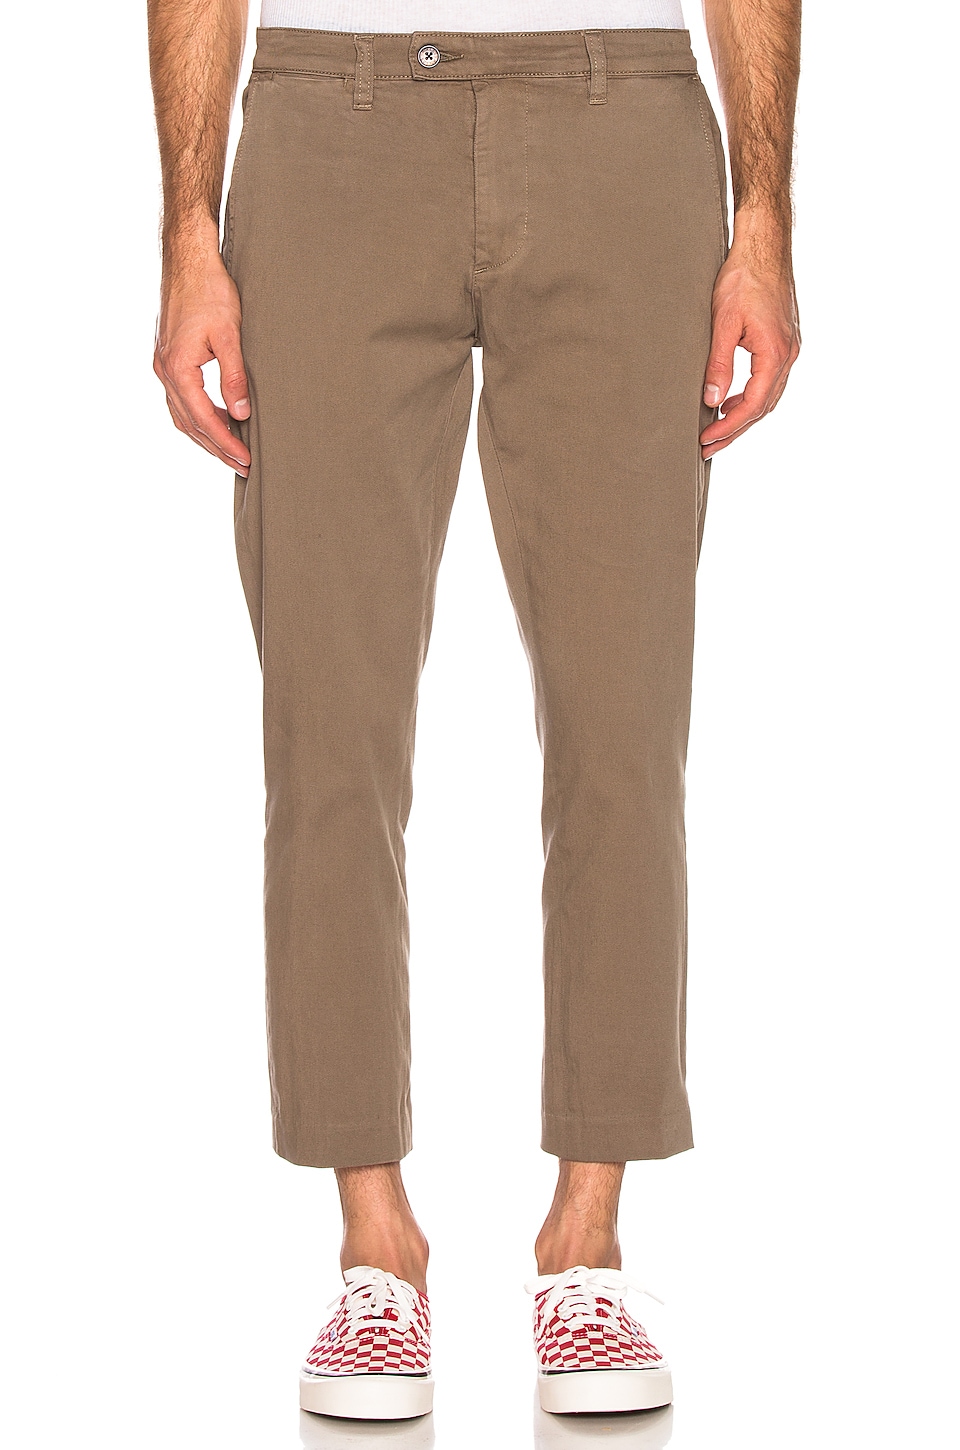 ROLLA'S Relaxo Cropped Pant,ROLS-MP7